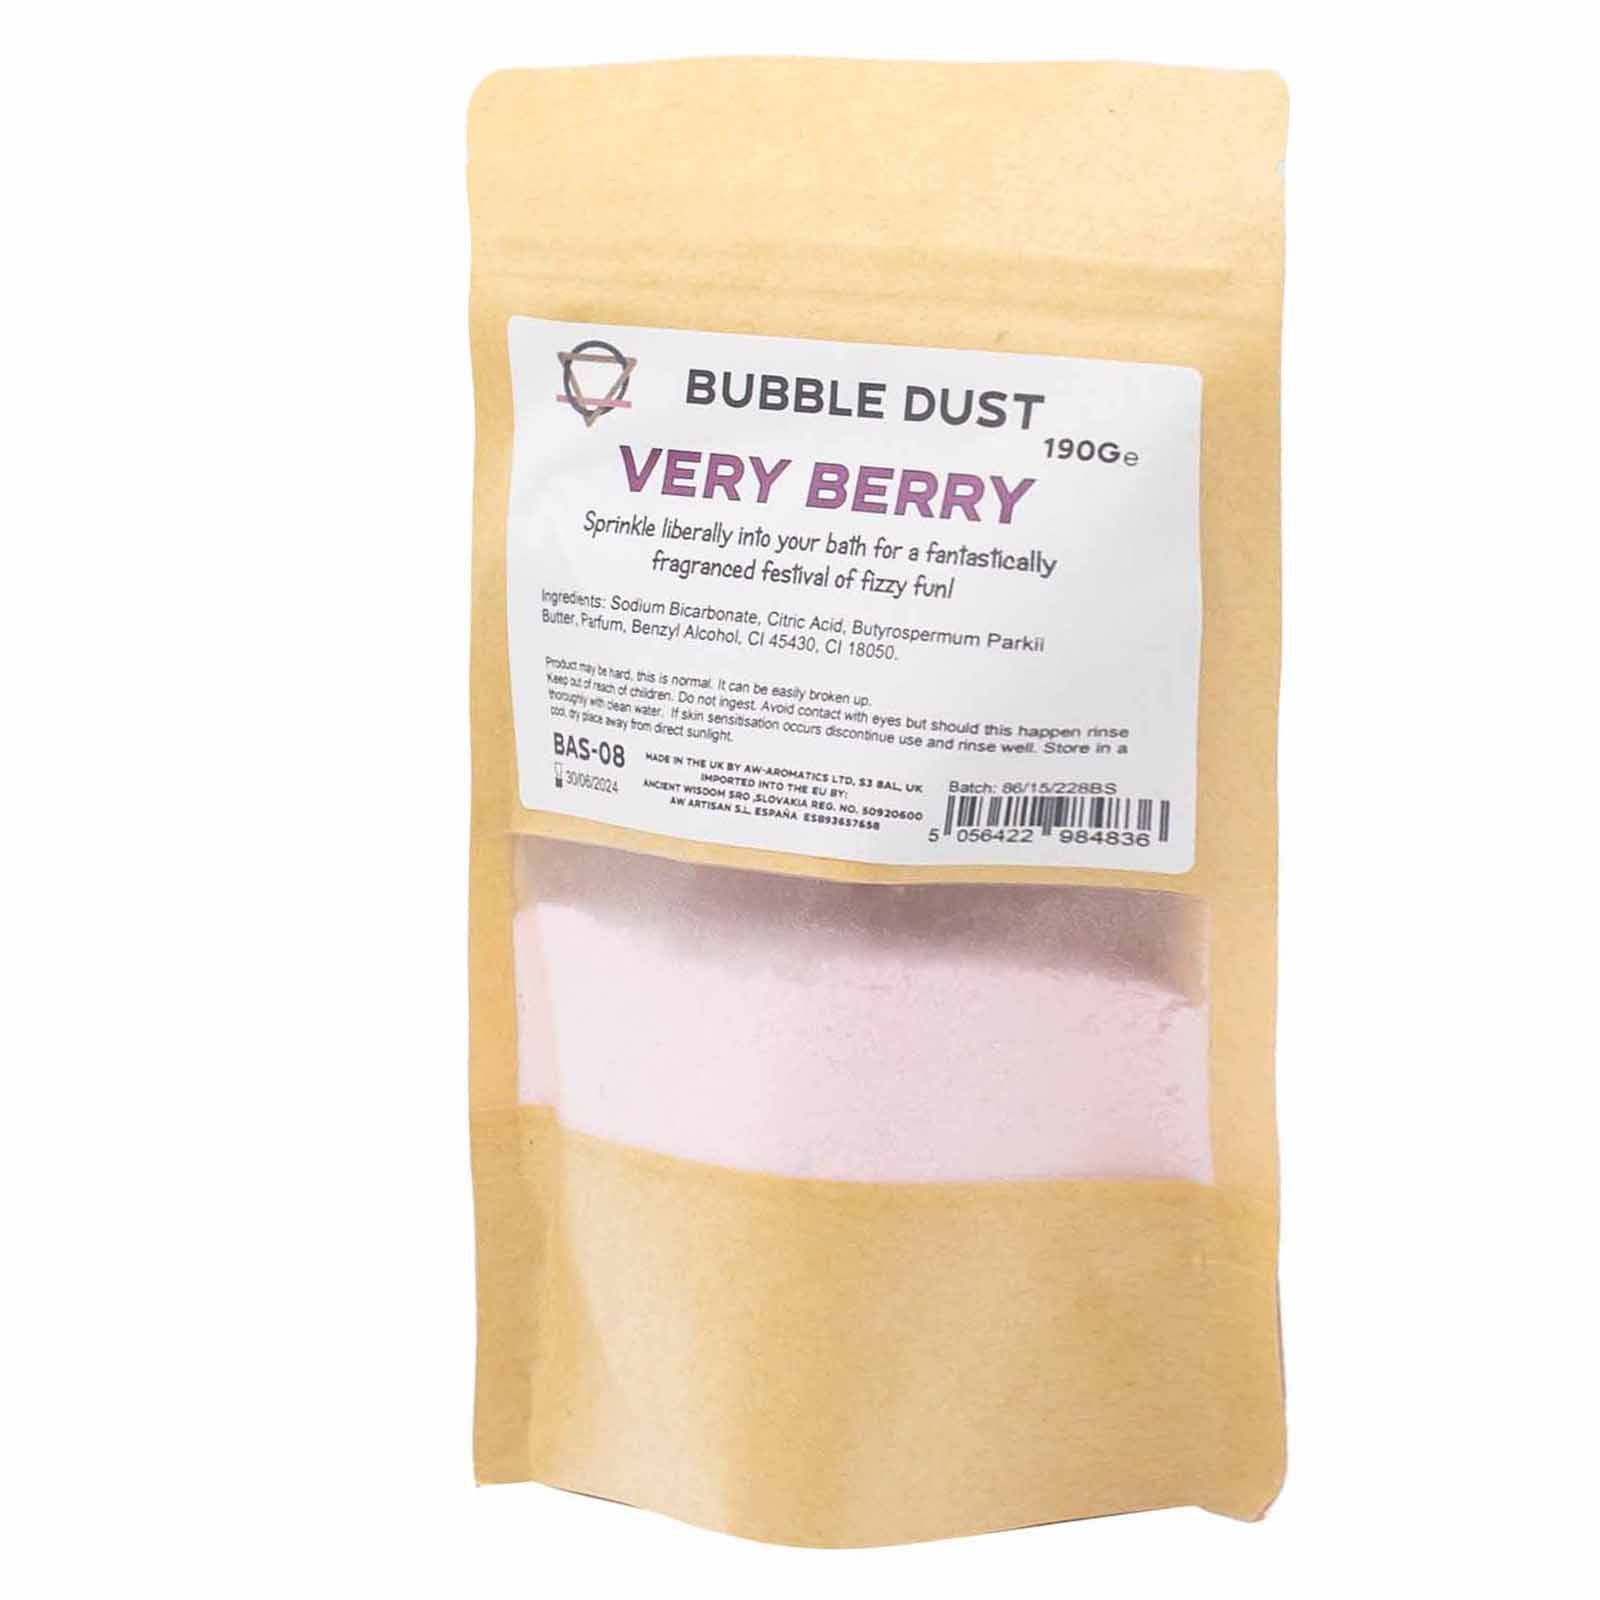 View Very Berry Bath Dust 190g information